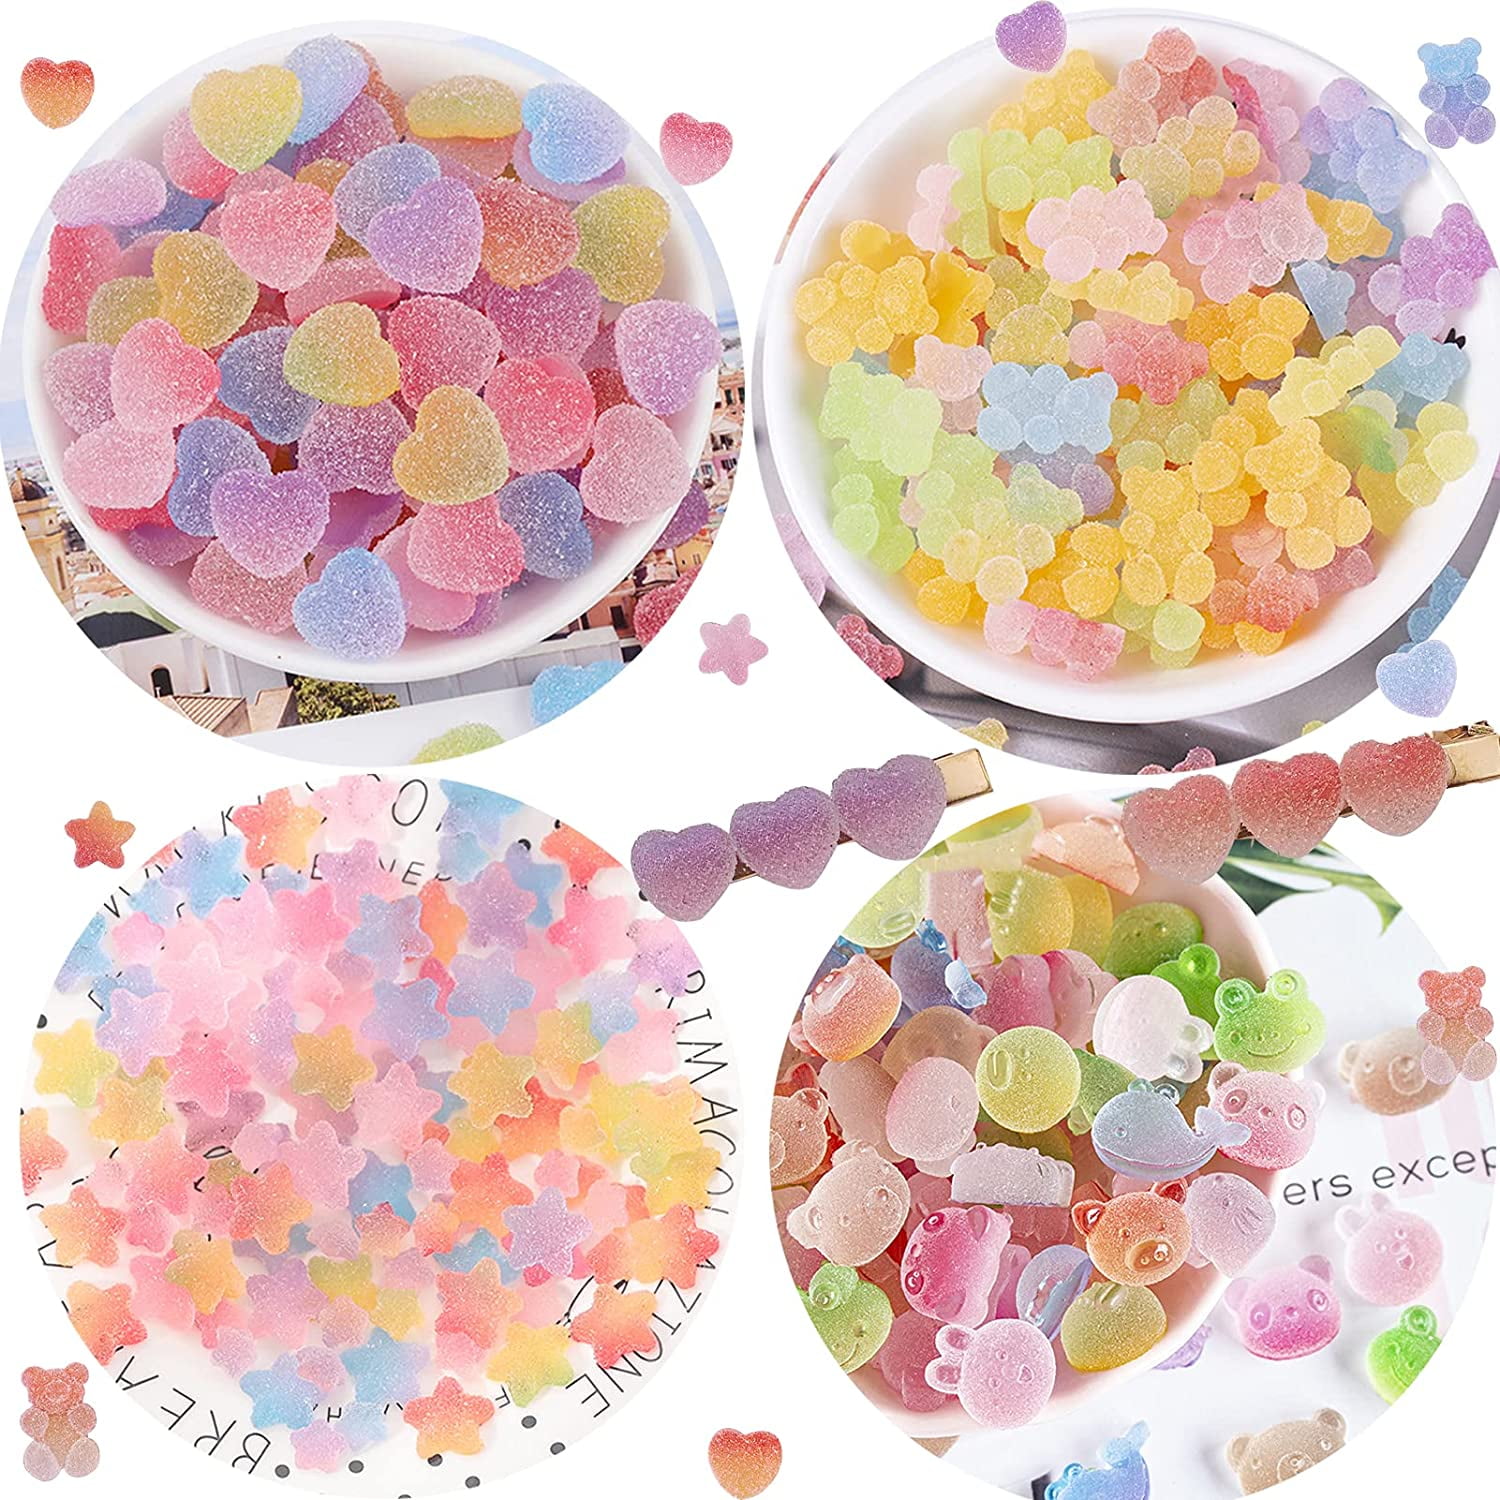 JINDUODUO 180 Pcs Slime Charms Cute Set, Kawaii Charms Bulk for Slime Assorted Candy Sweets Flatback Resin for DIY Craft Making and Ornament